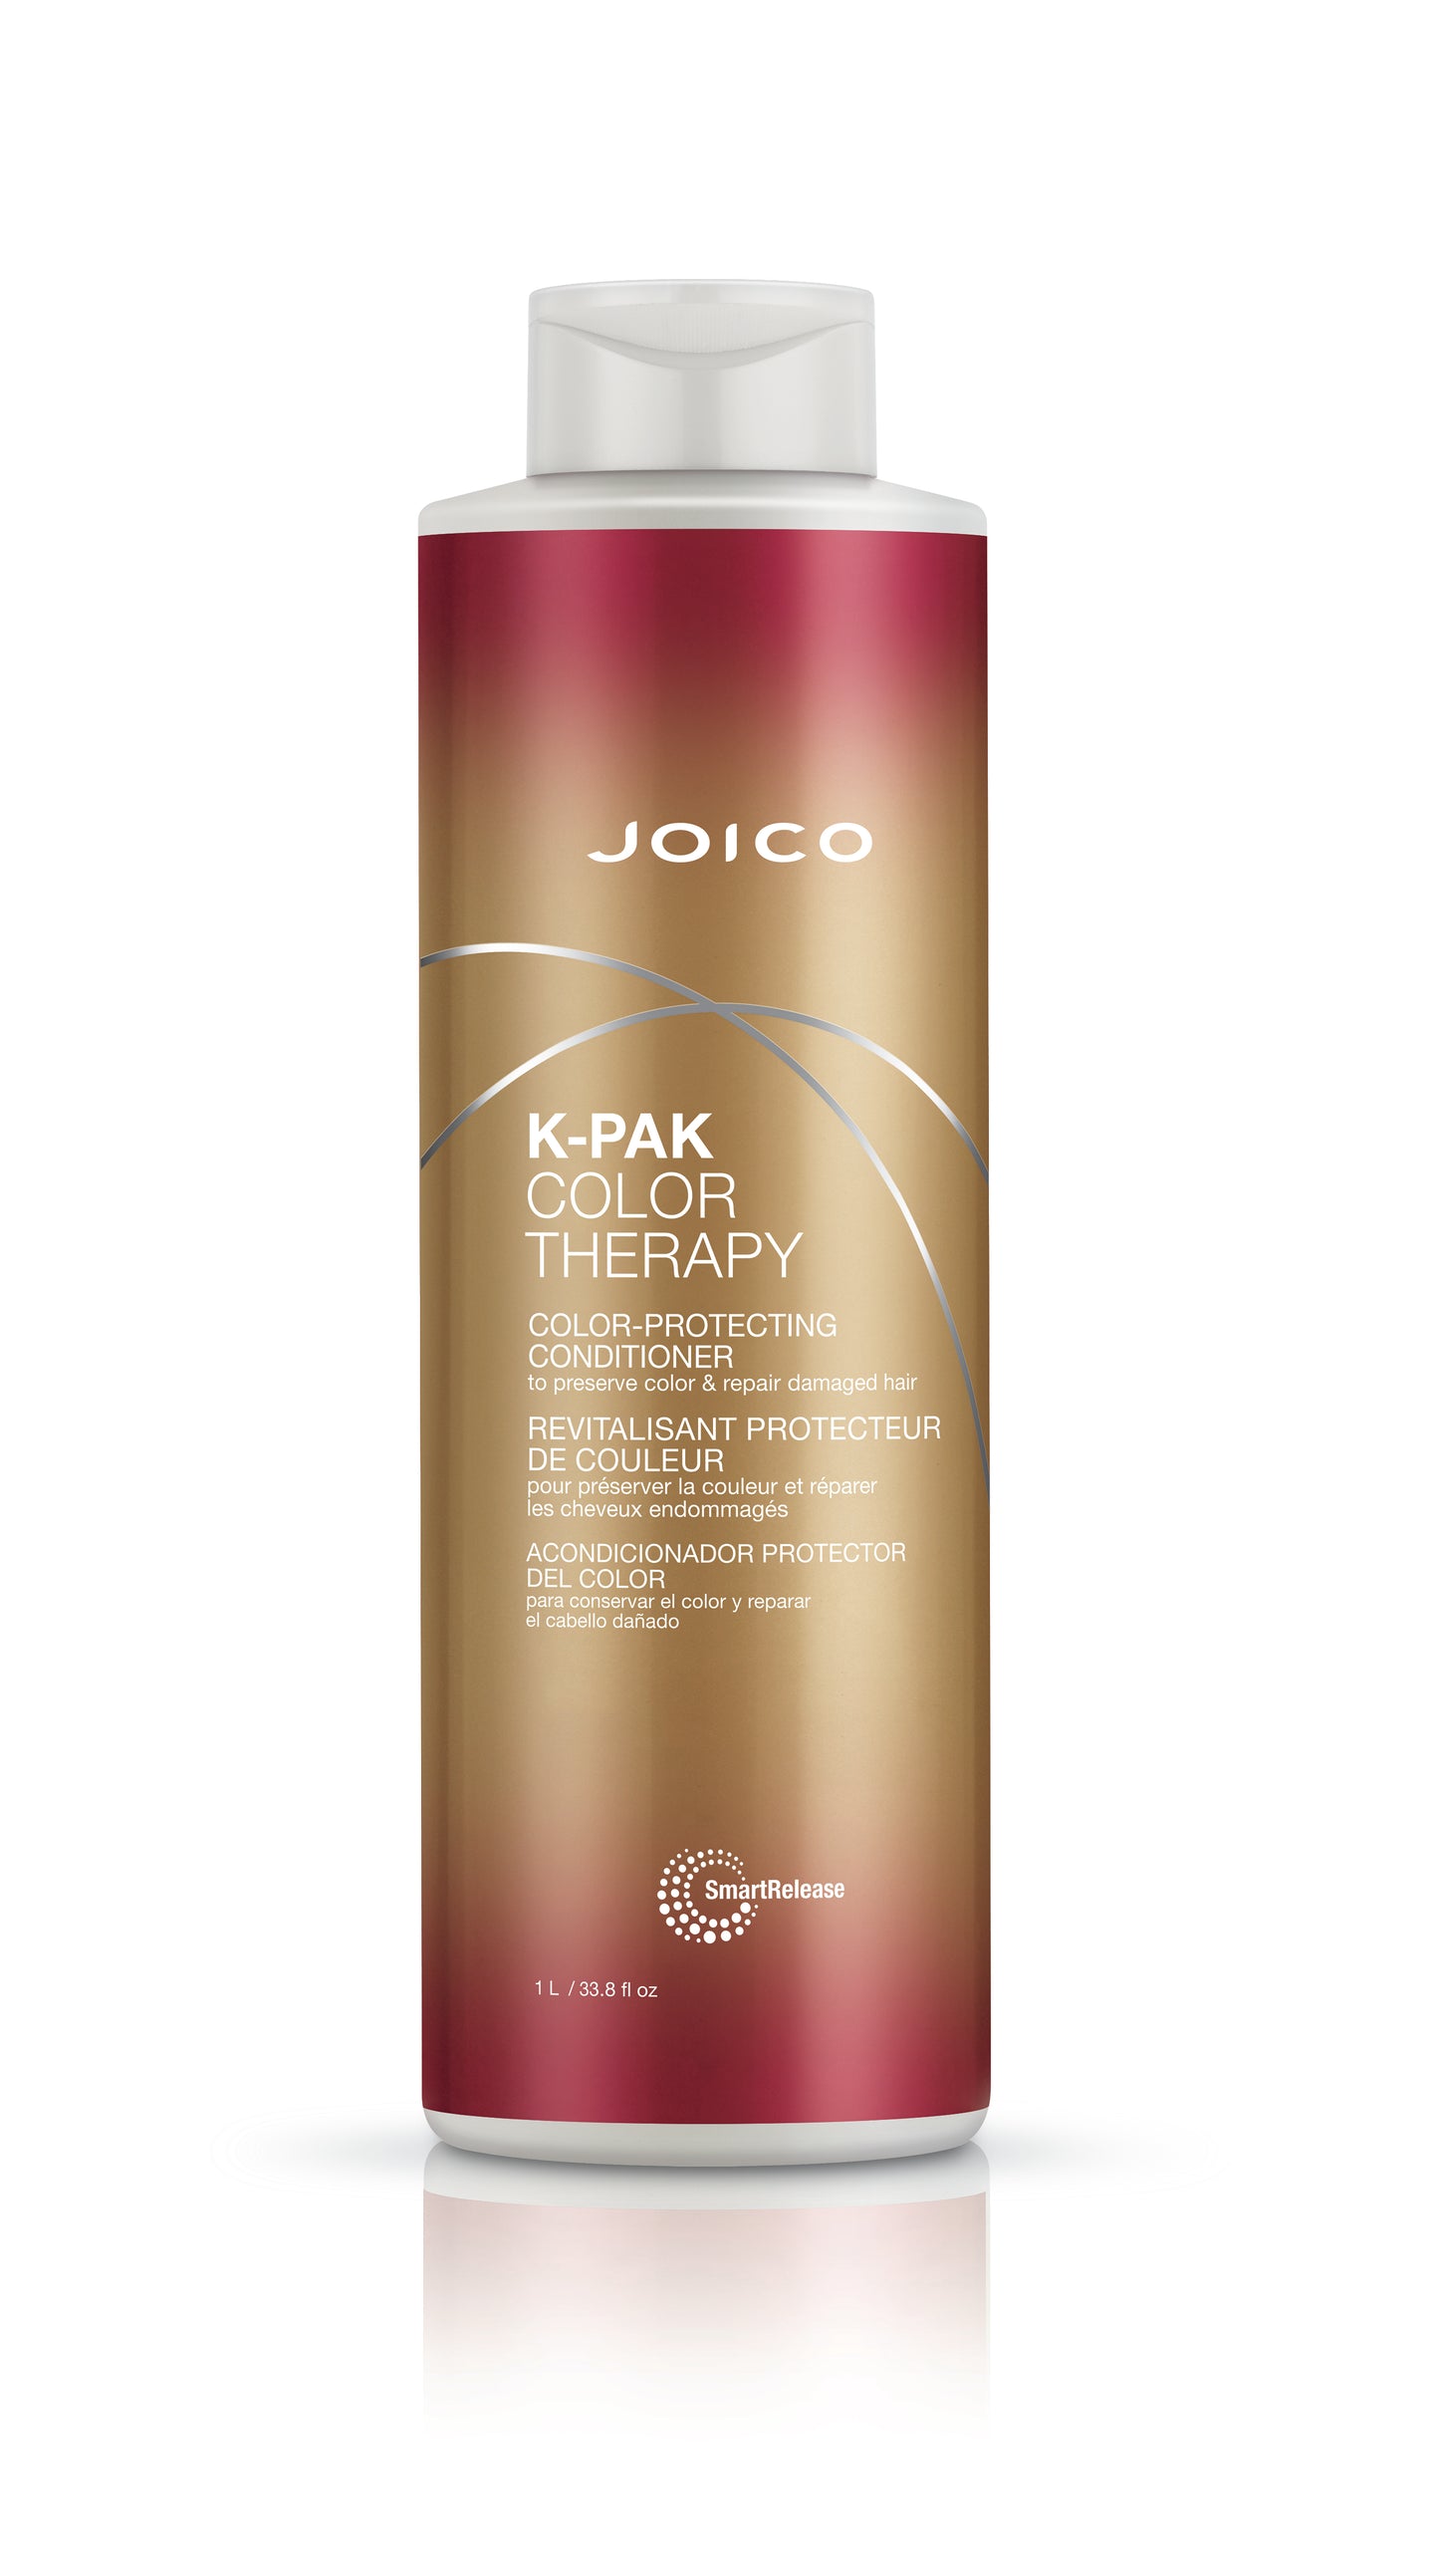 Cond Joico K-PAK Color Therapy Litre